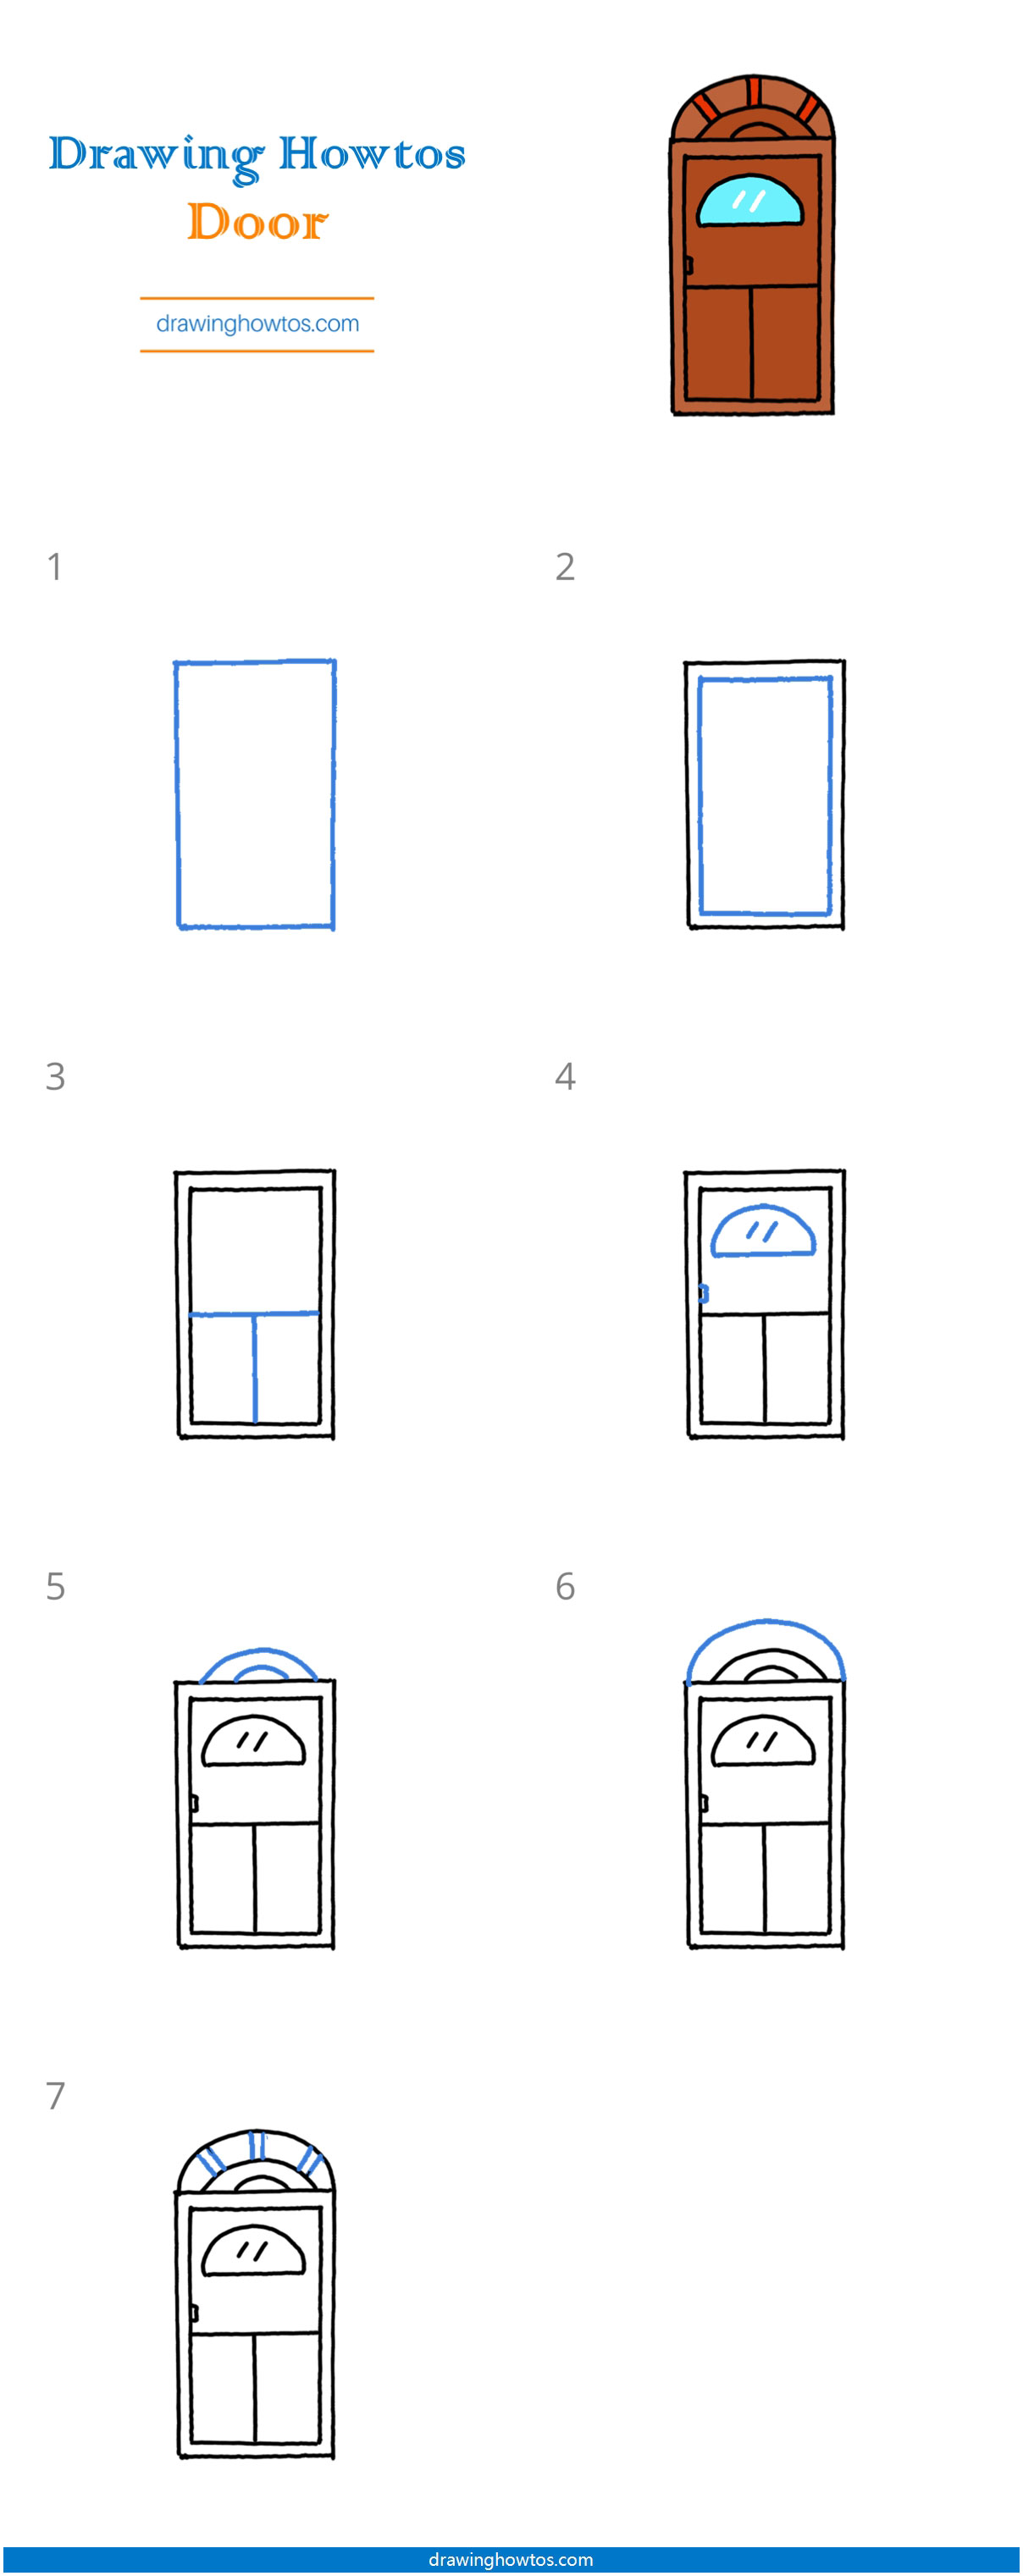 How to Draw a Door Step by Step